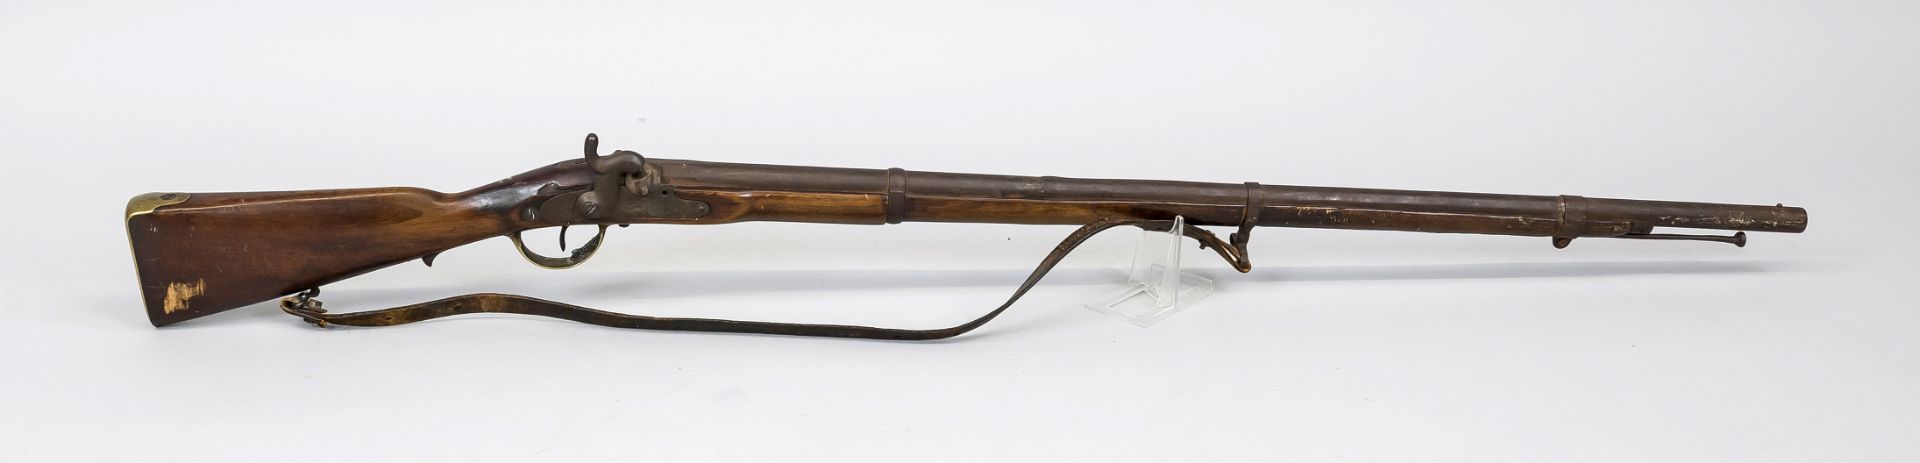 Percussion rifle, 19th century, walnut stock, lock and barrel with various probably milit.